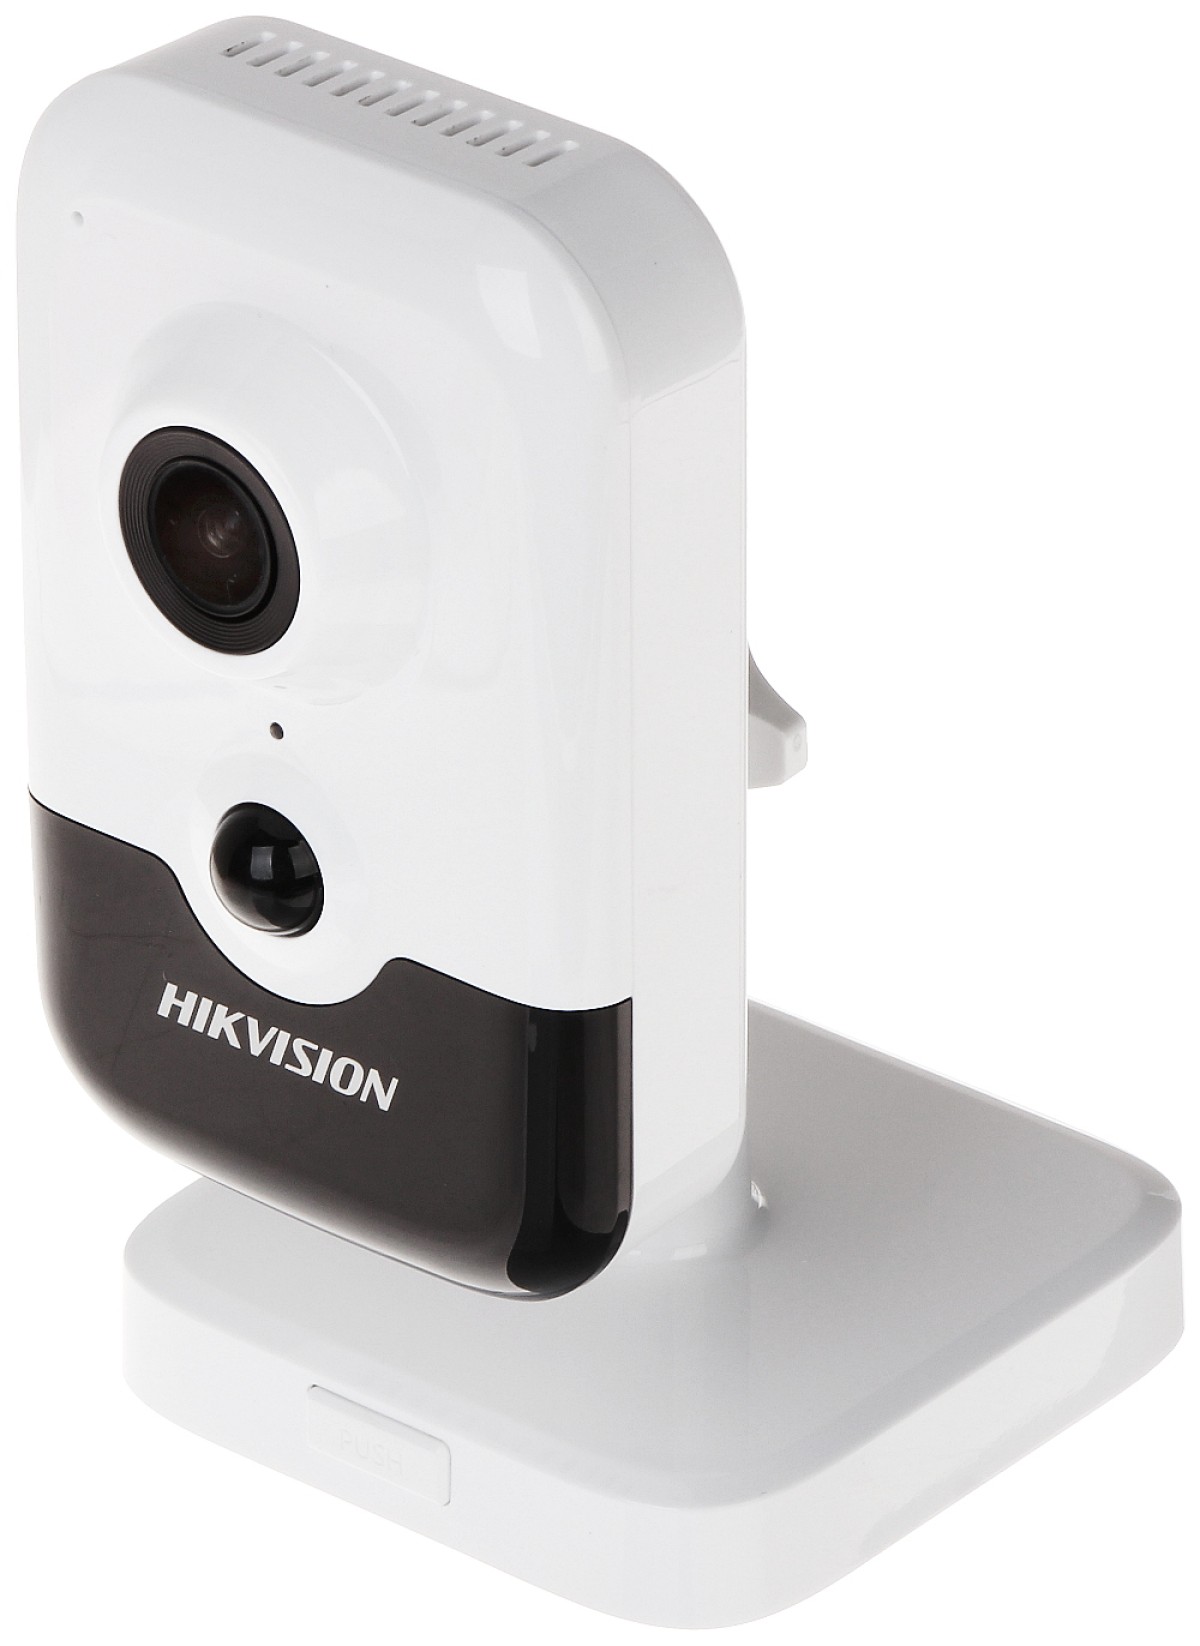 IP-камера Hikvision DS-2CD2425FWD-I (2.8) 256_351.jpg